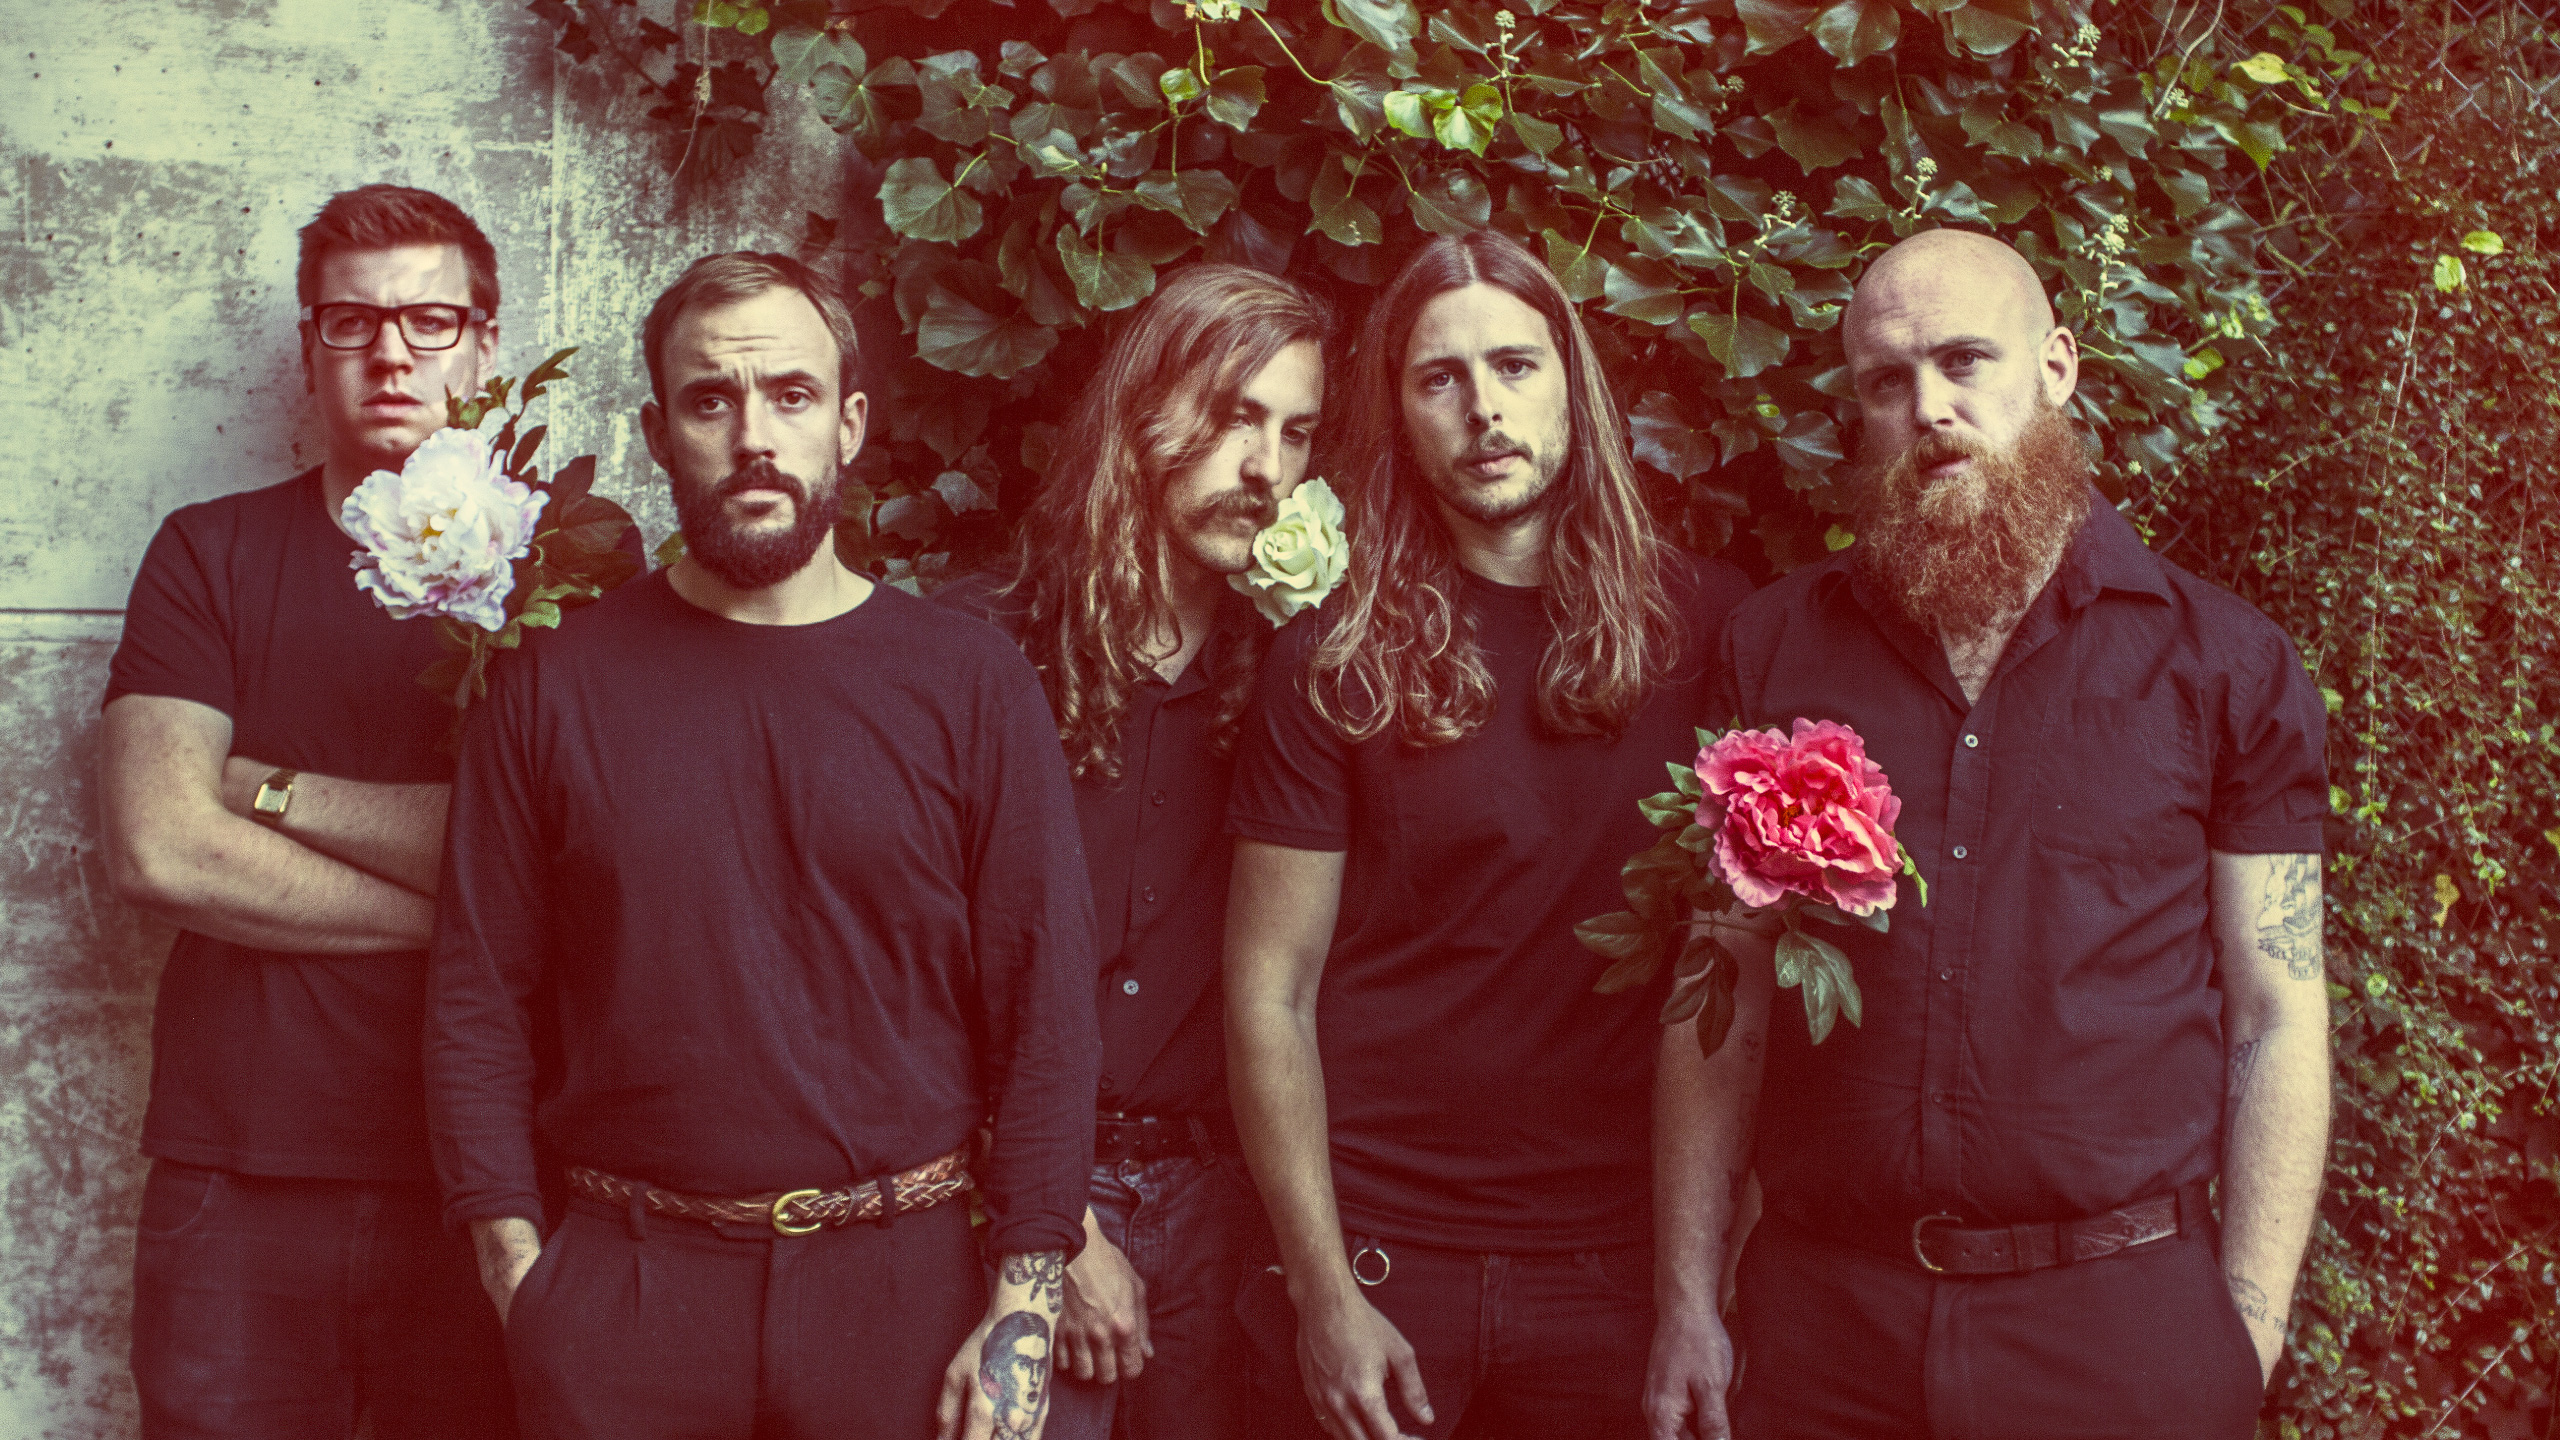 Idles pose in front of a bush holding flowers